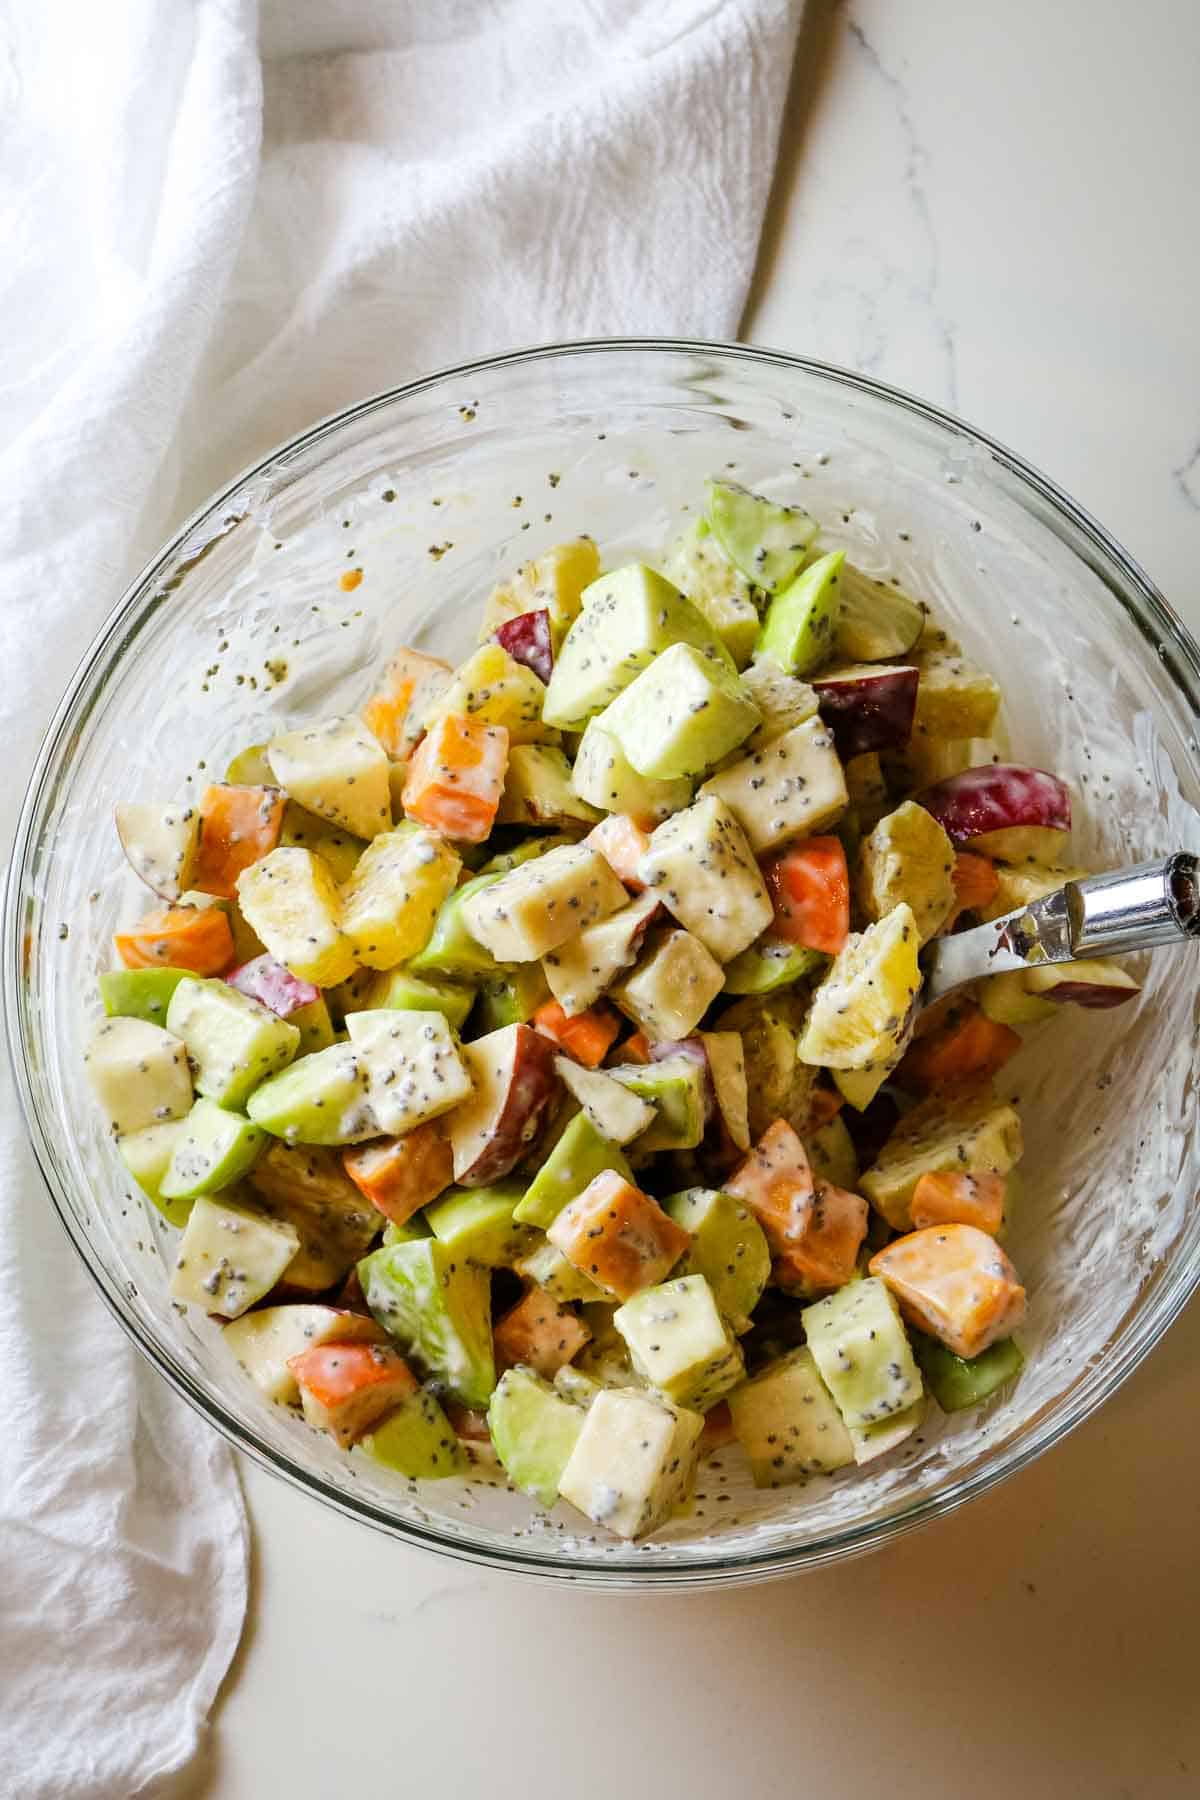 fruit salad tossed in creamy dressing for fall fruit salad